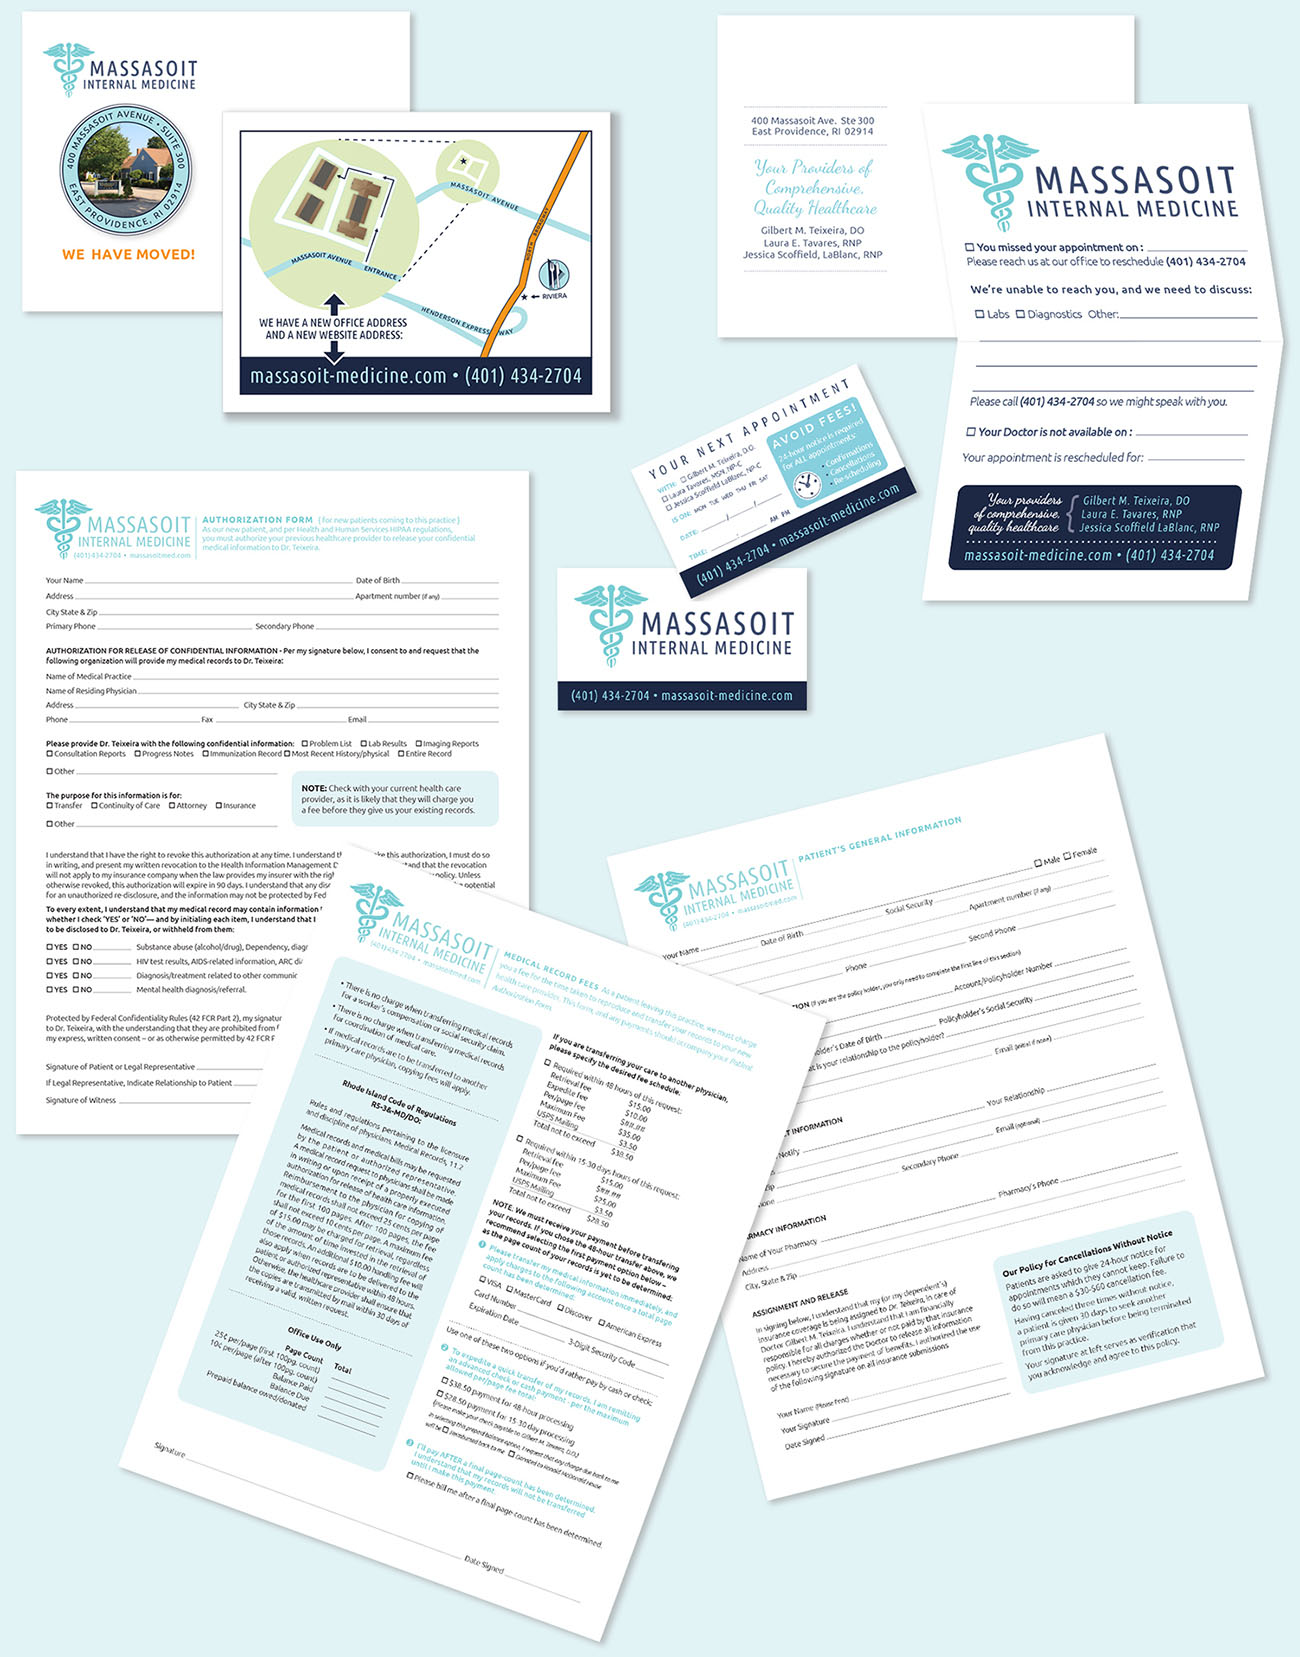 Massasoit Medicine, Business Collateral and Patient Forms